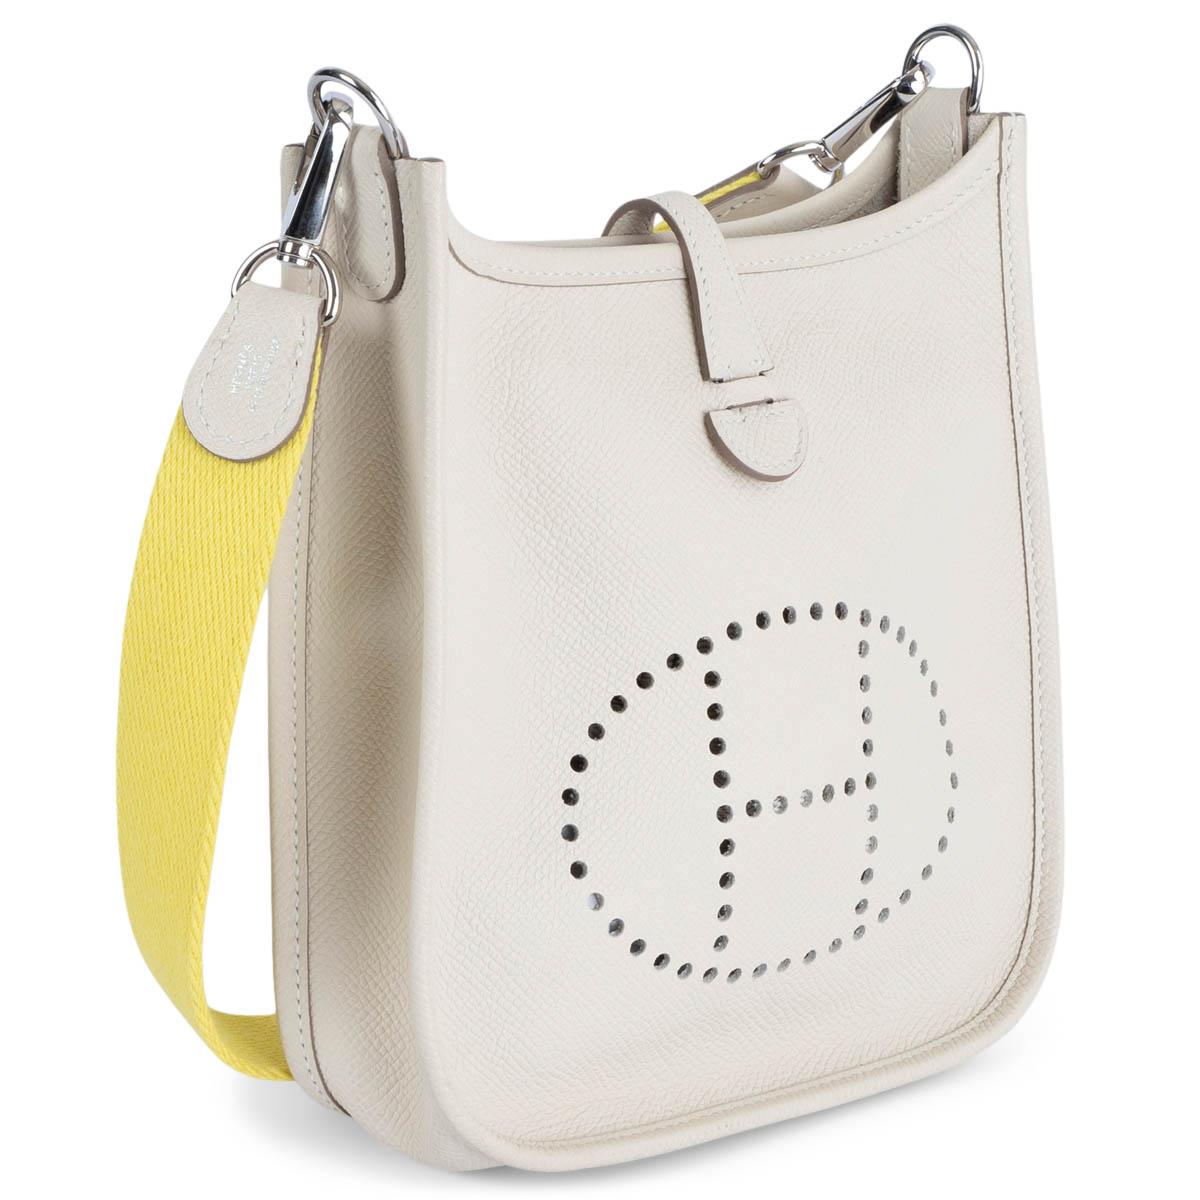 100% authentic Hermès Evelyne 16 TPM Crossbody Bag in Craie (ivory) Veau Epsom leather with lime wool sanglestrap, perforated leather 